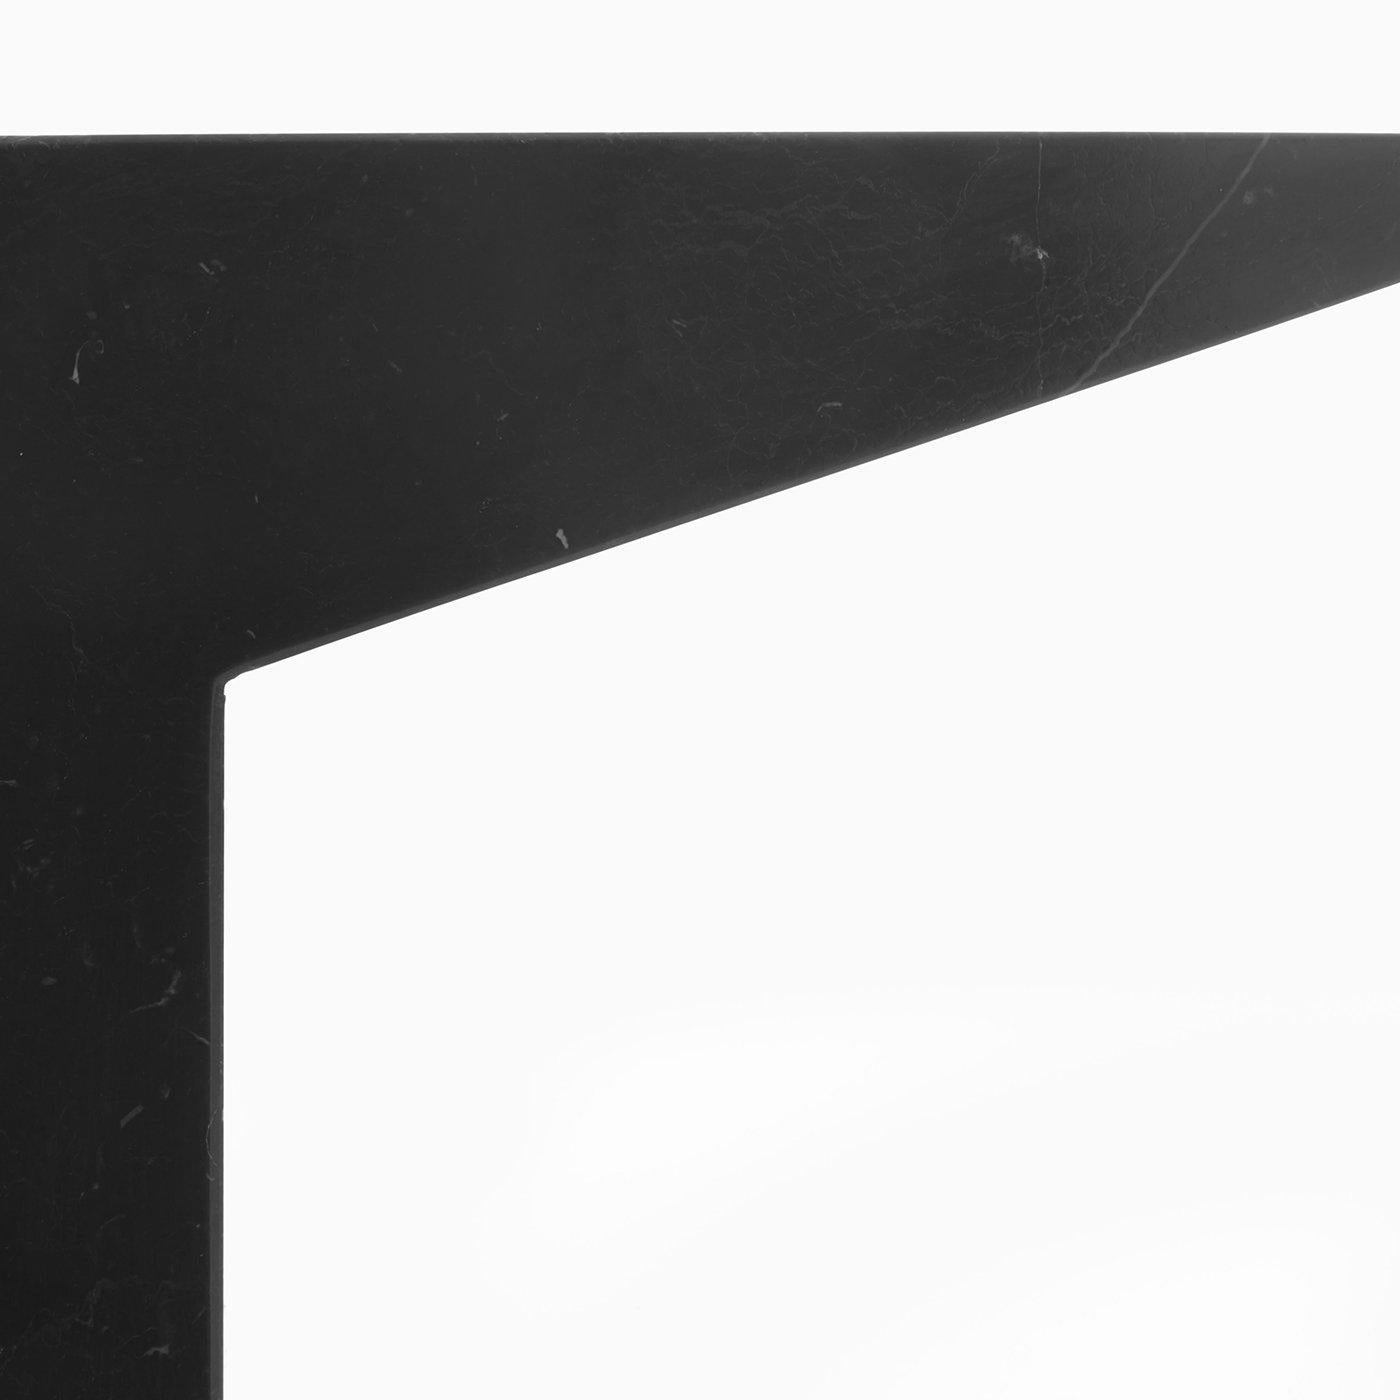 Umbrella stand in black Marquina marble, matte polished finish.